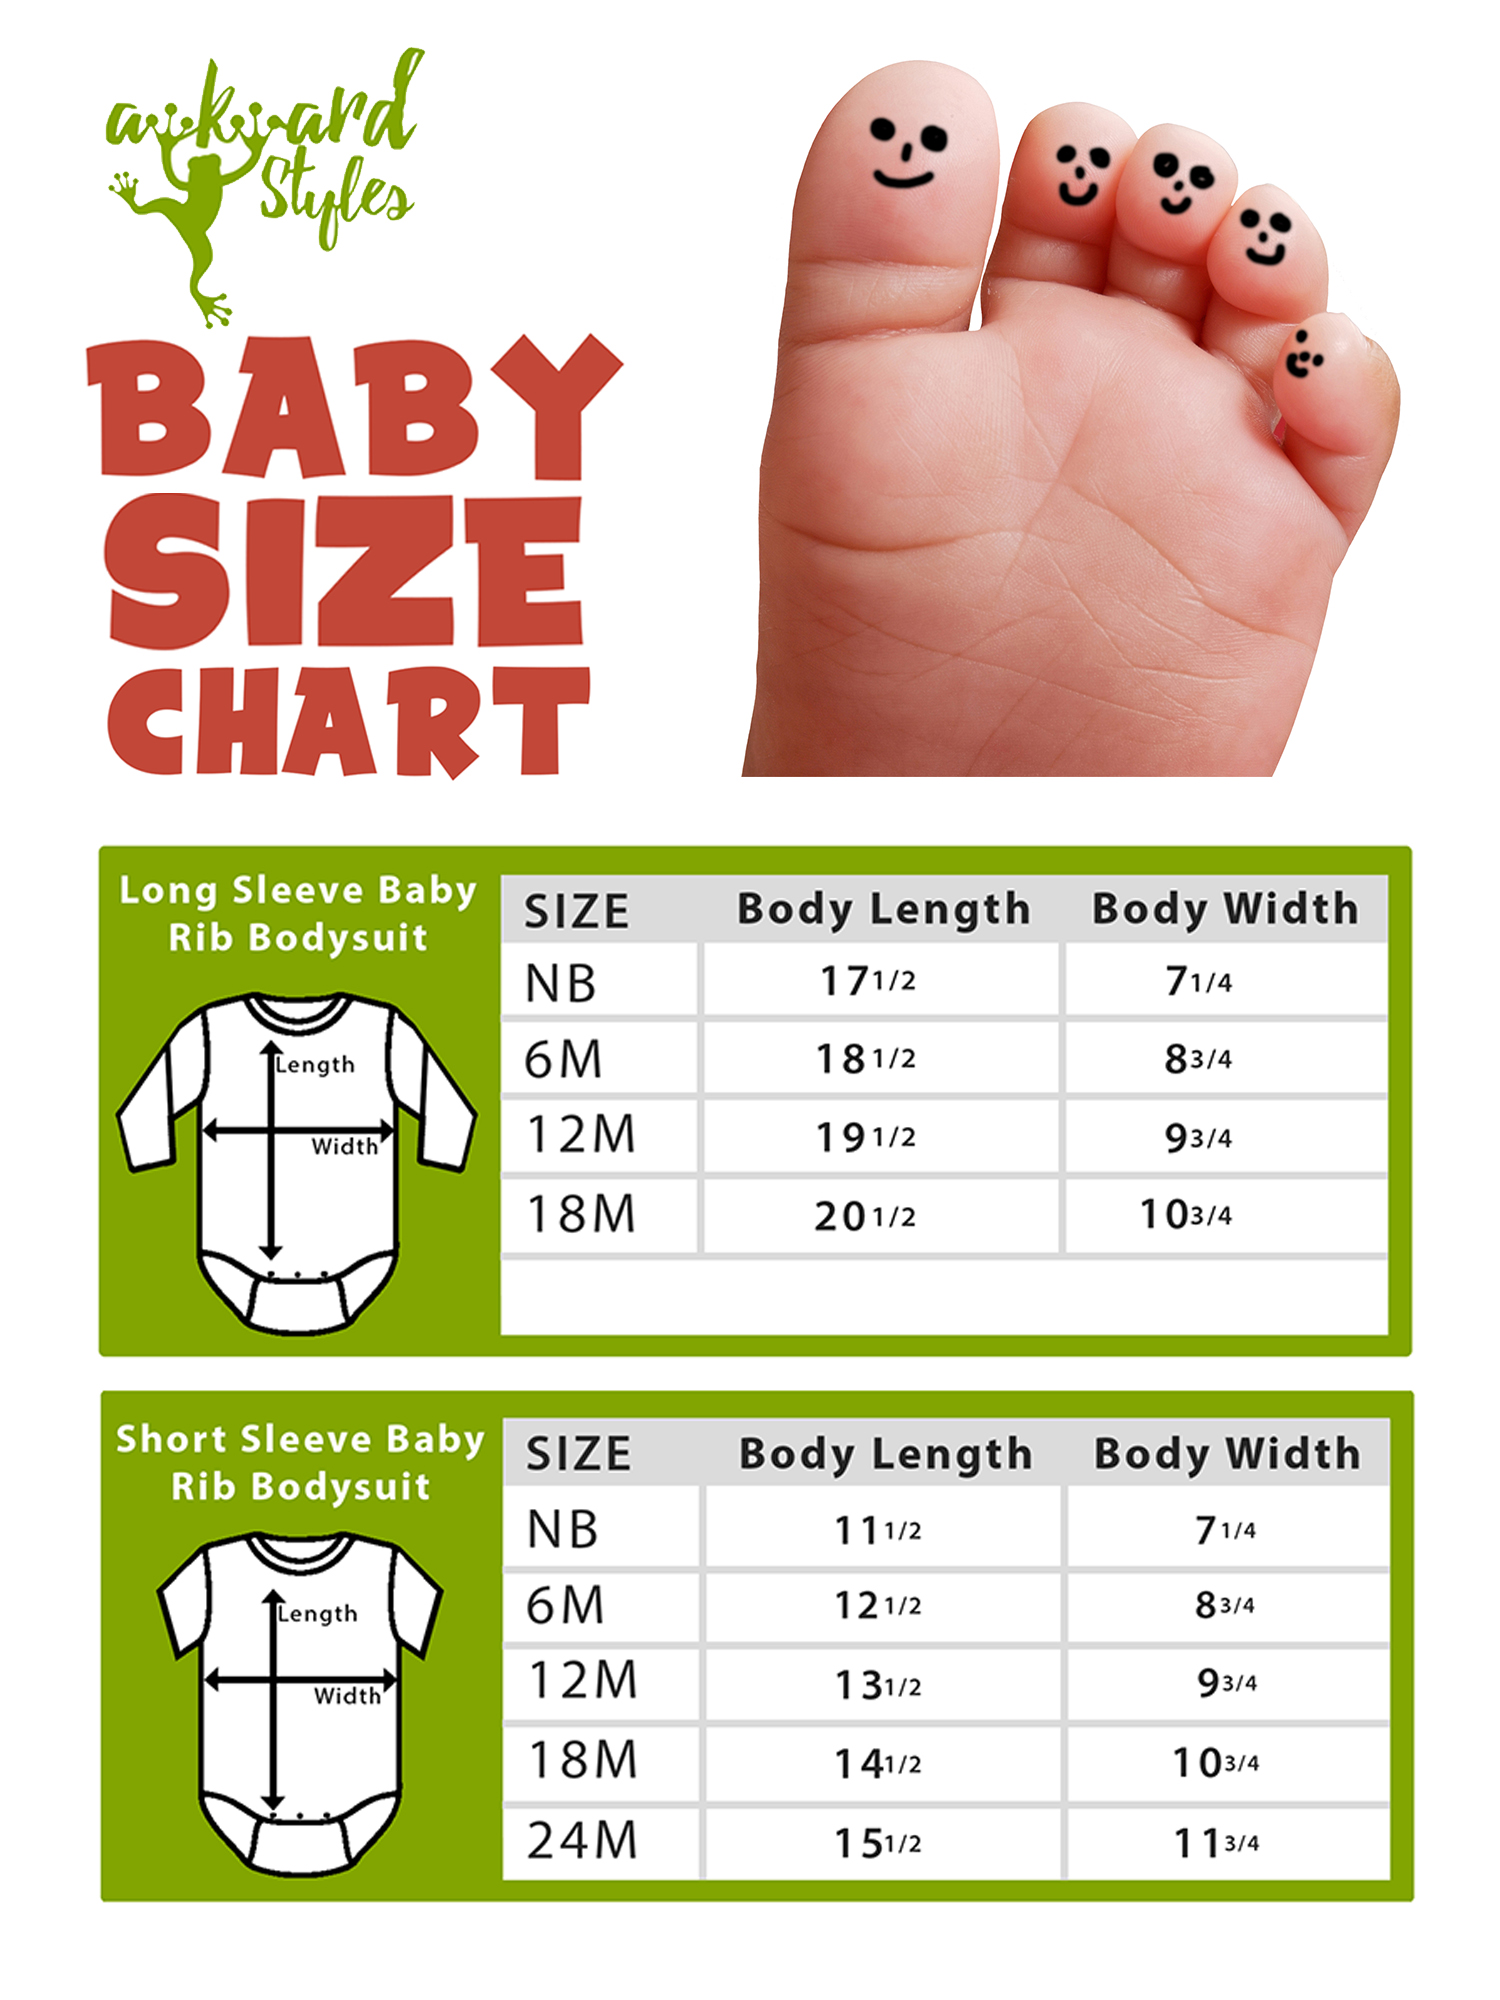 Awkward Styles Luckiest Baby In The World Short Sleeve Baby Bodysuit Irish Baby One Piece Top Irish Gifts for Baby St. Patrick's Day Bodysuit for Baby Boy Saint Patrick One Piece Top for Baby Girl - image 4 of 4